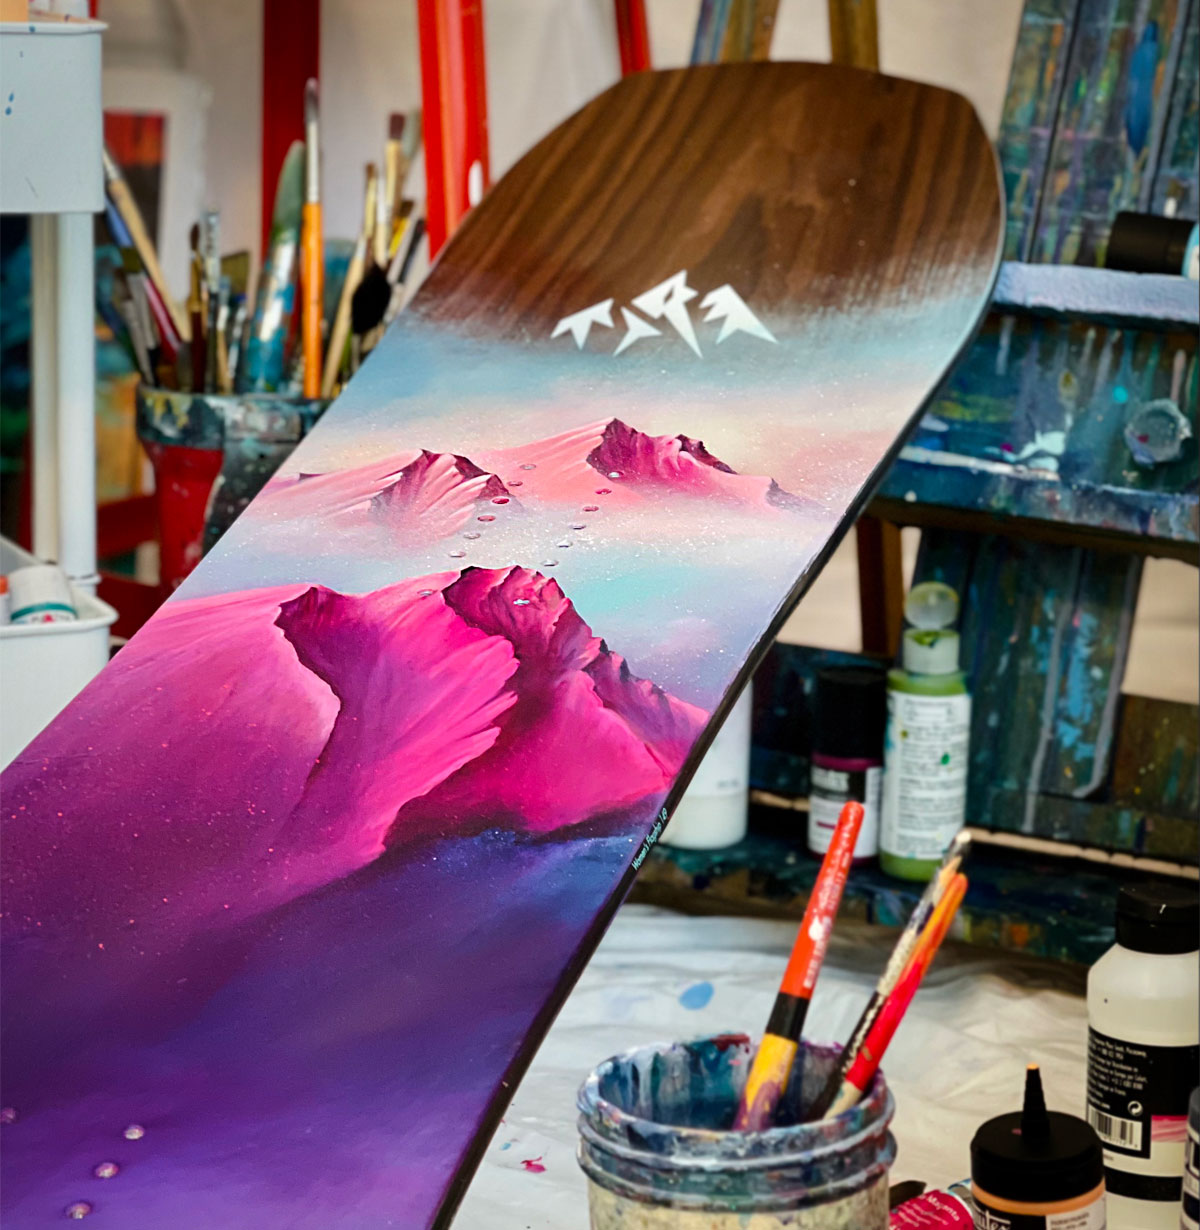 Can You Use Acrylic Paint On Snowboard? 